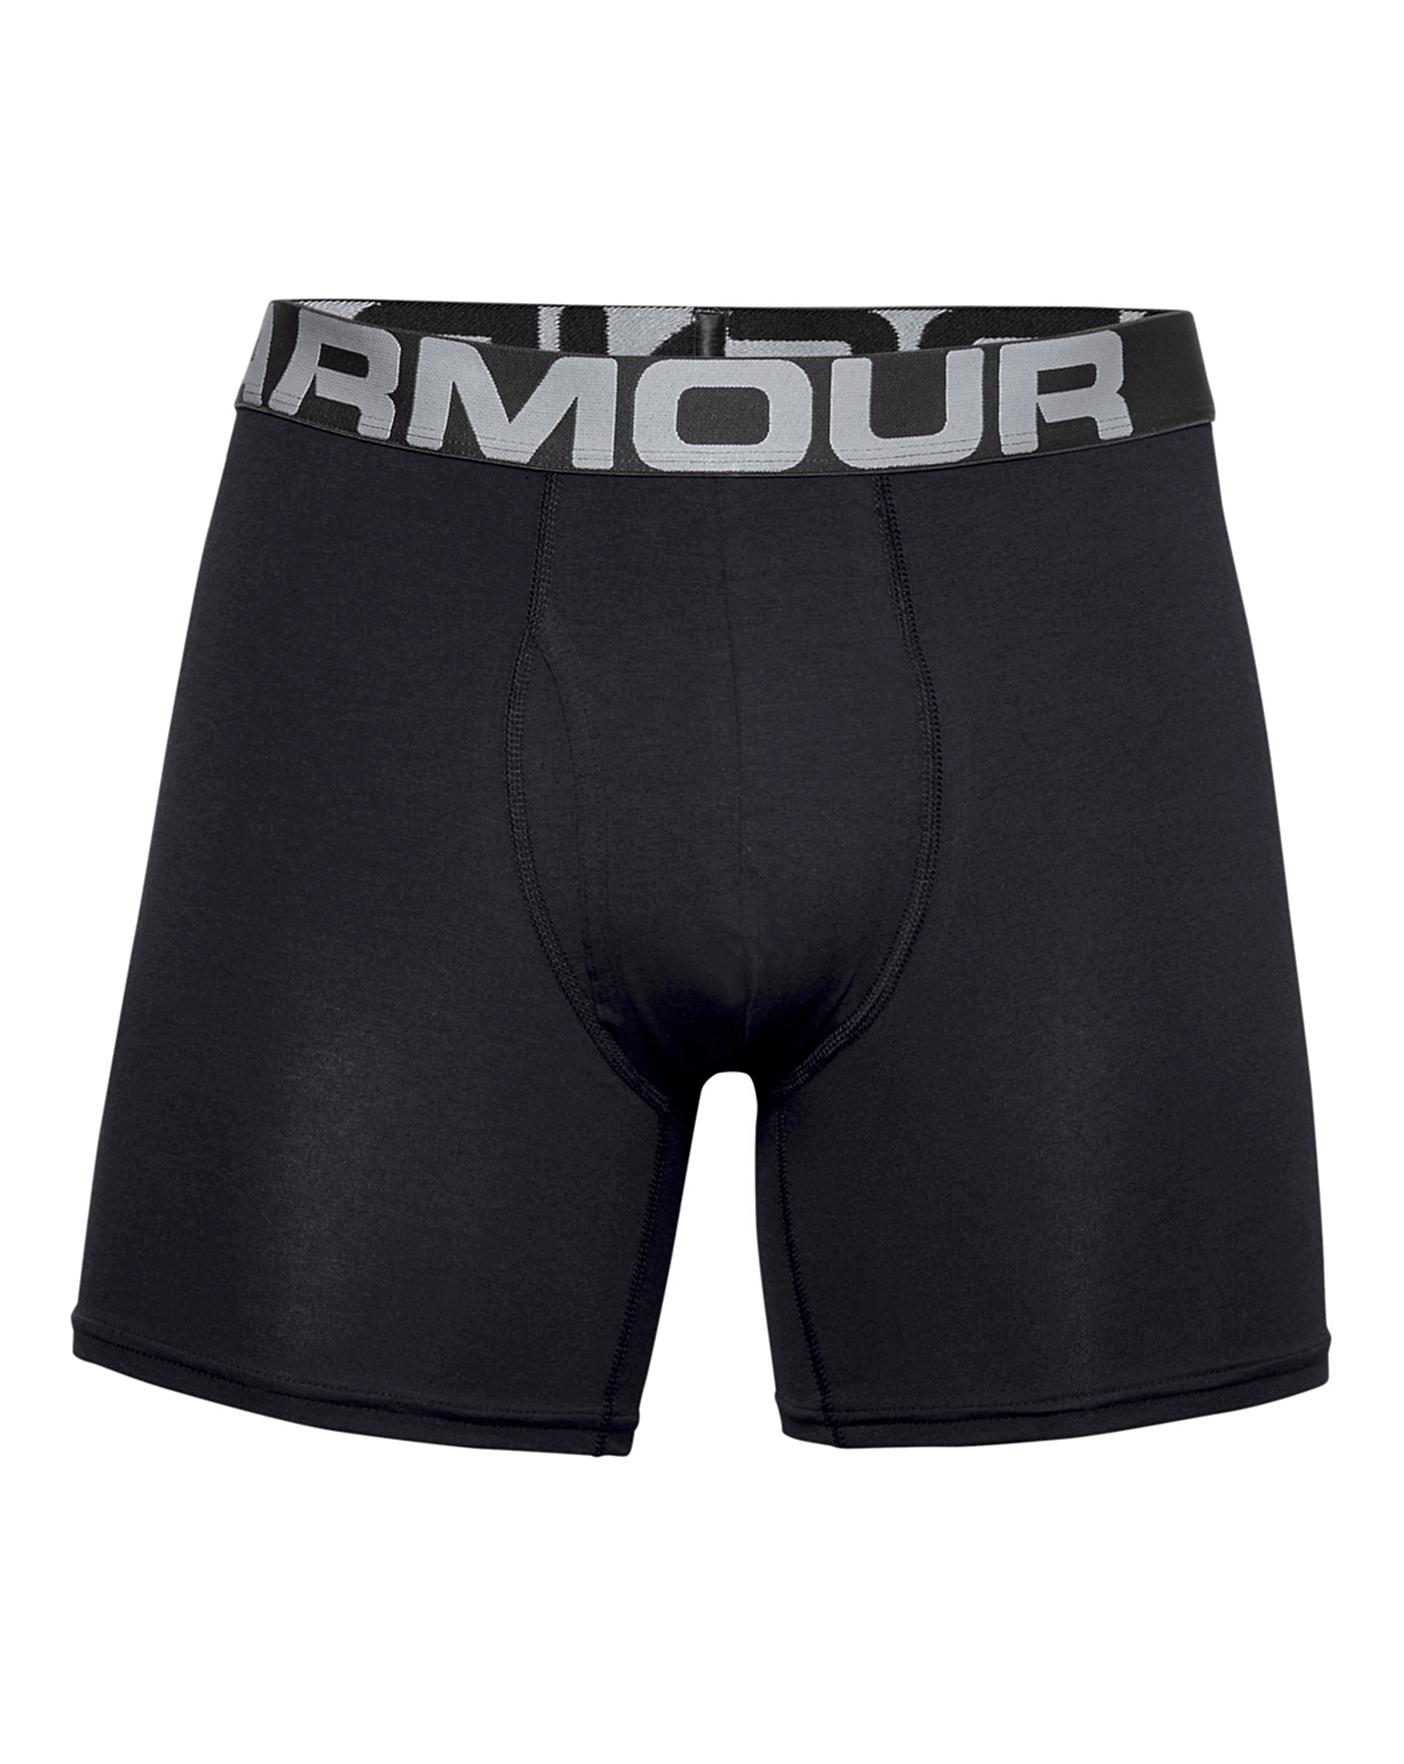 Under Armour Charged Cotton 3 Pck Boxers | J D Williams